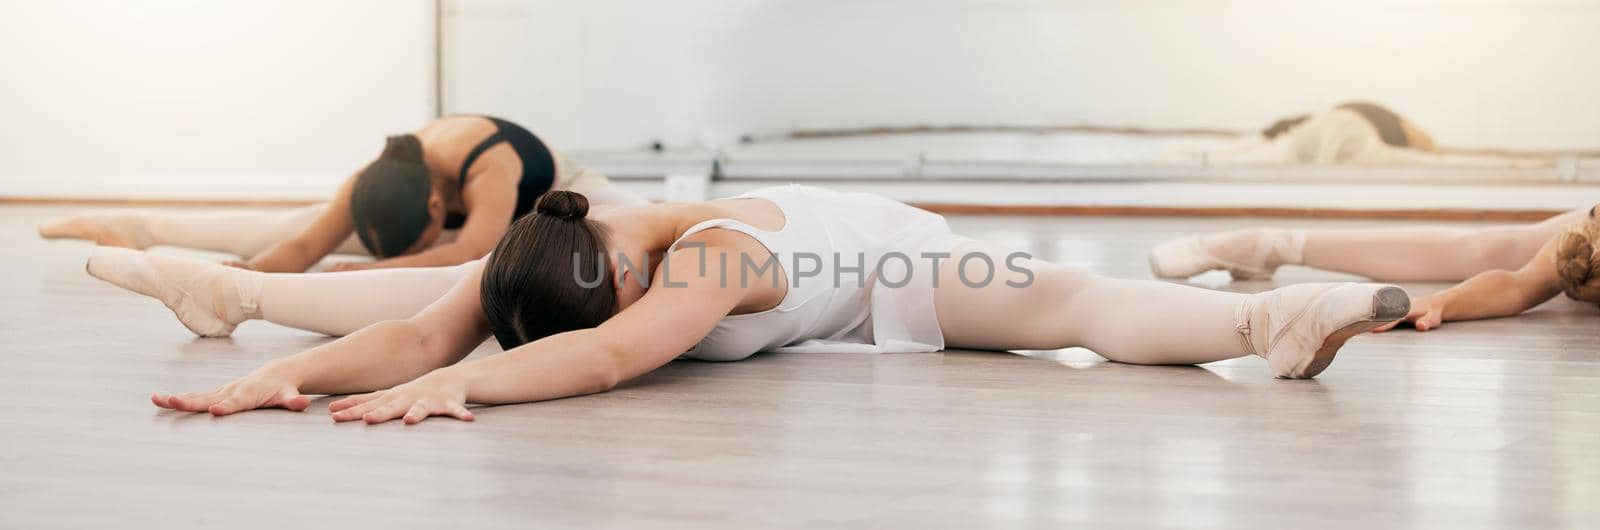 Fitness, ballet or dance woman stretching with training, exercise or wellness energy in theatre, concert or sport event. Health, education or girl student workout before art concert in sports class.